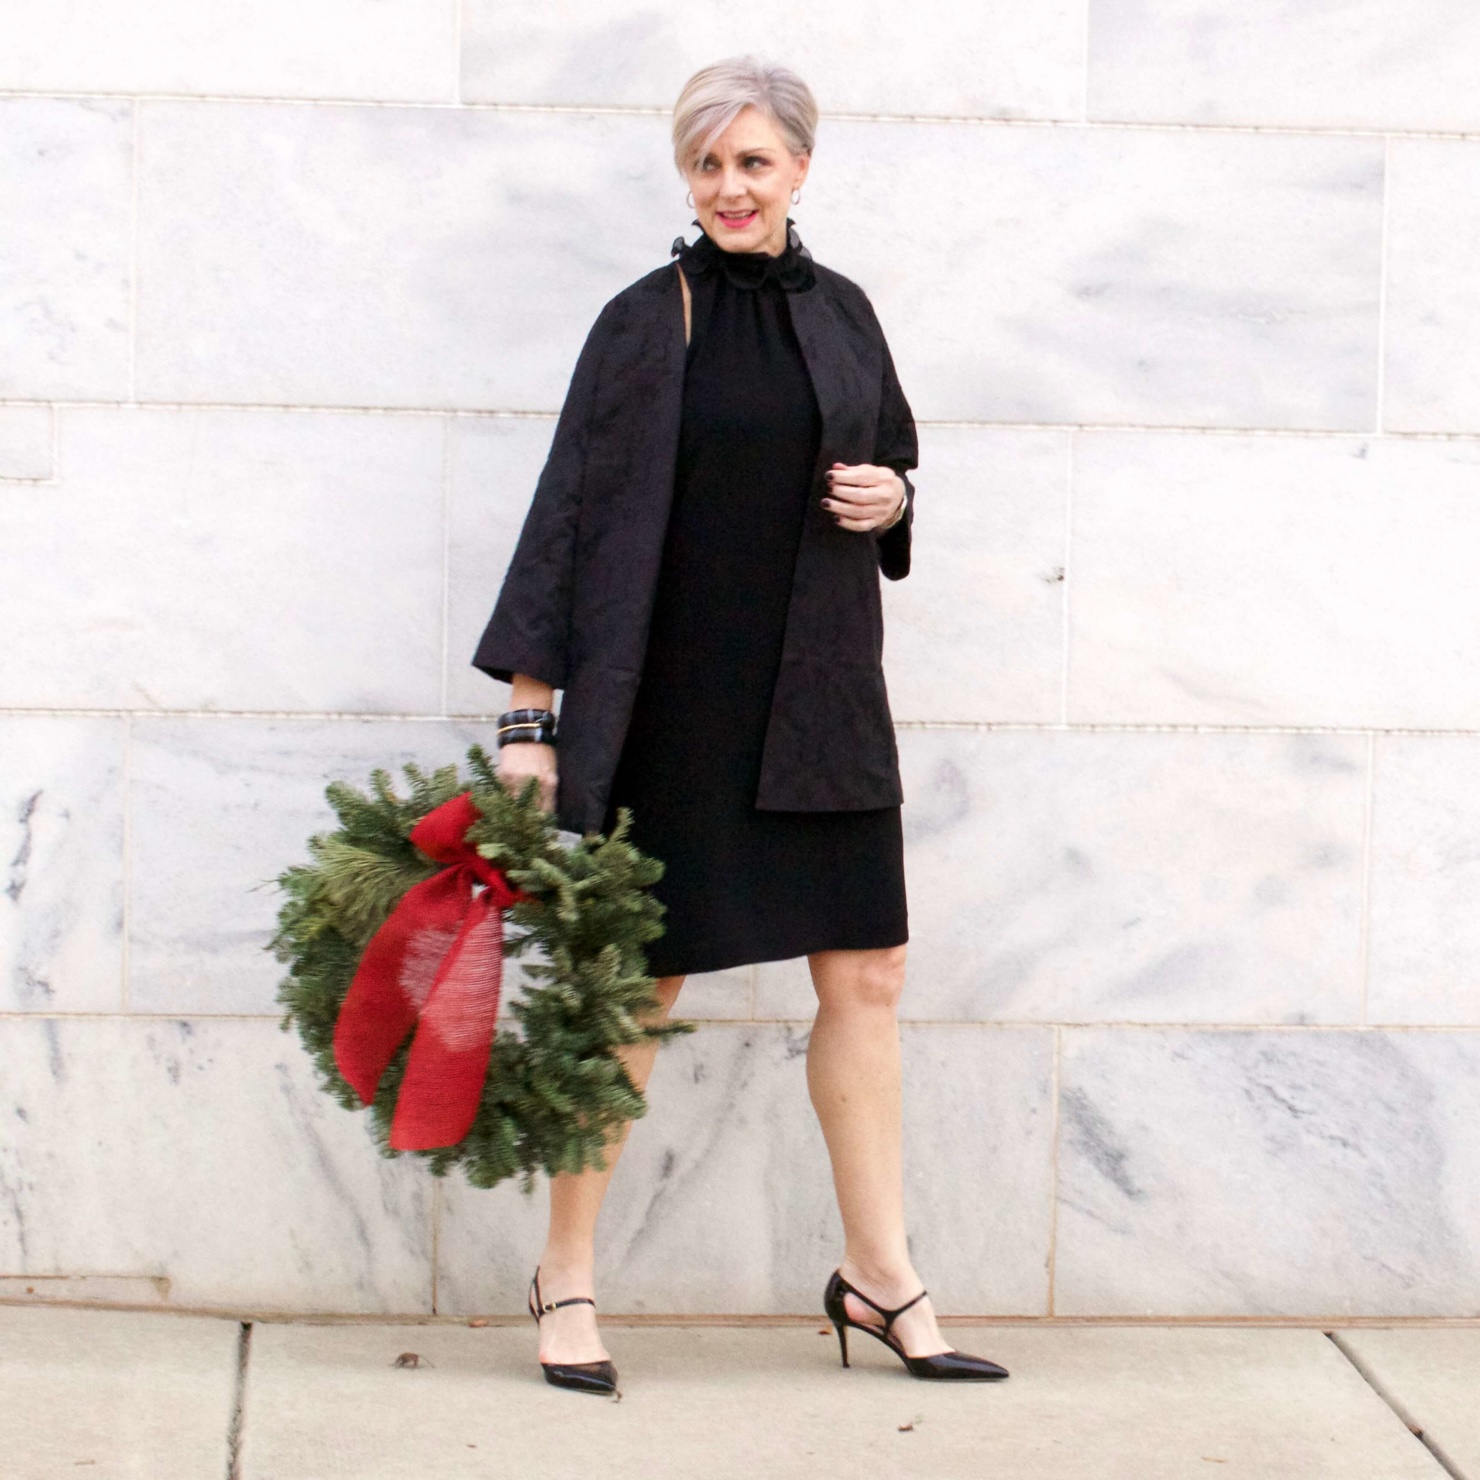 beth from Style at a Certain Age wears a Eileen Fisher shimmer jacquard 3/4 sleeve jacket and ruffled black dress